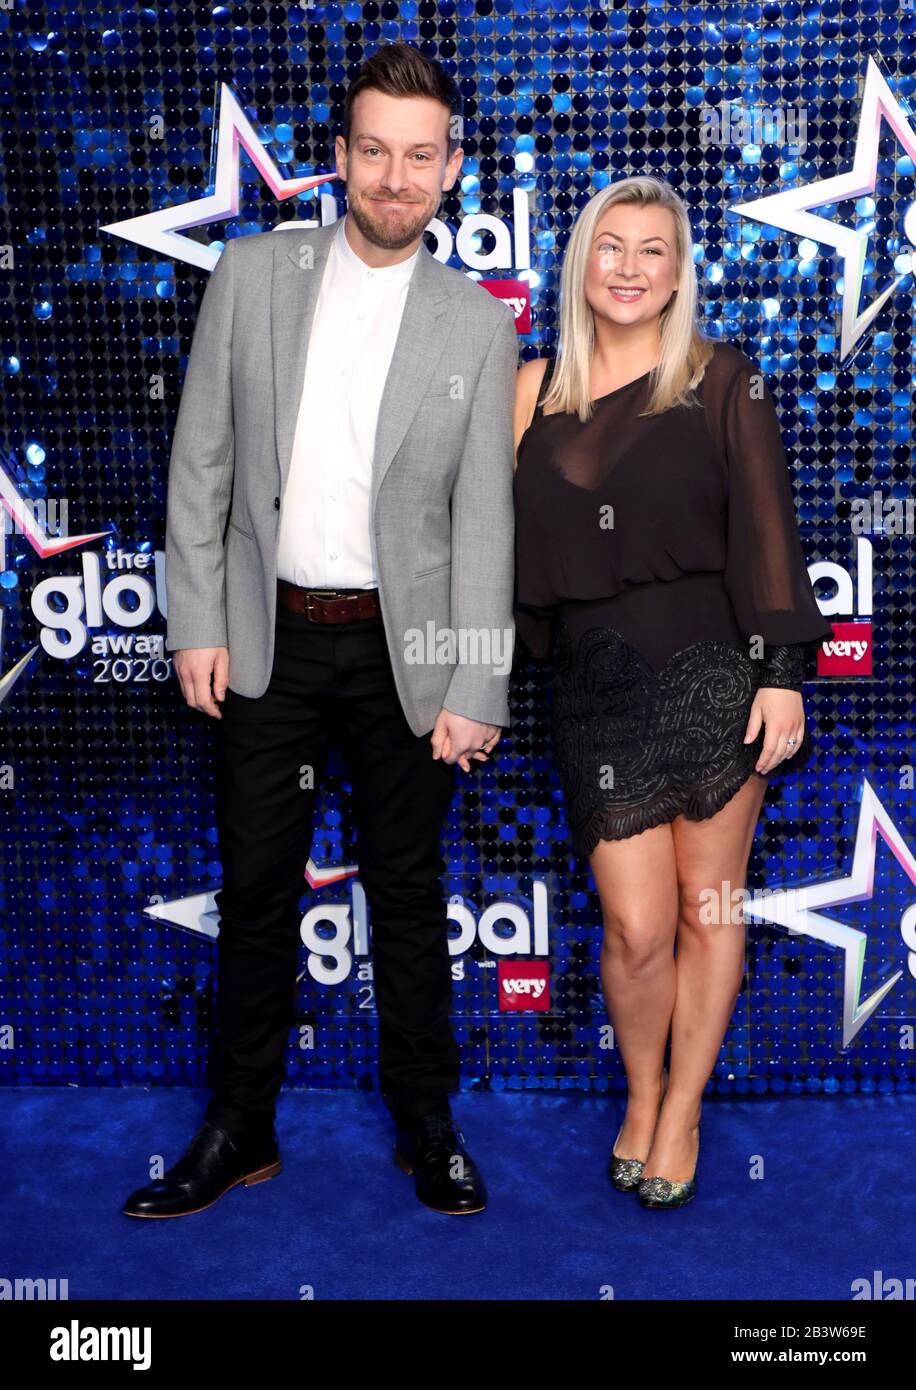 Chris Ramsey and Rosie Ramsey attend The Global Awards 2020 with Very.co.uk at London's Eventim Apollo Hammersmith. Stock Photo